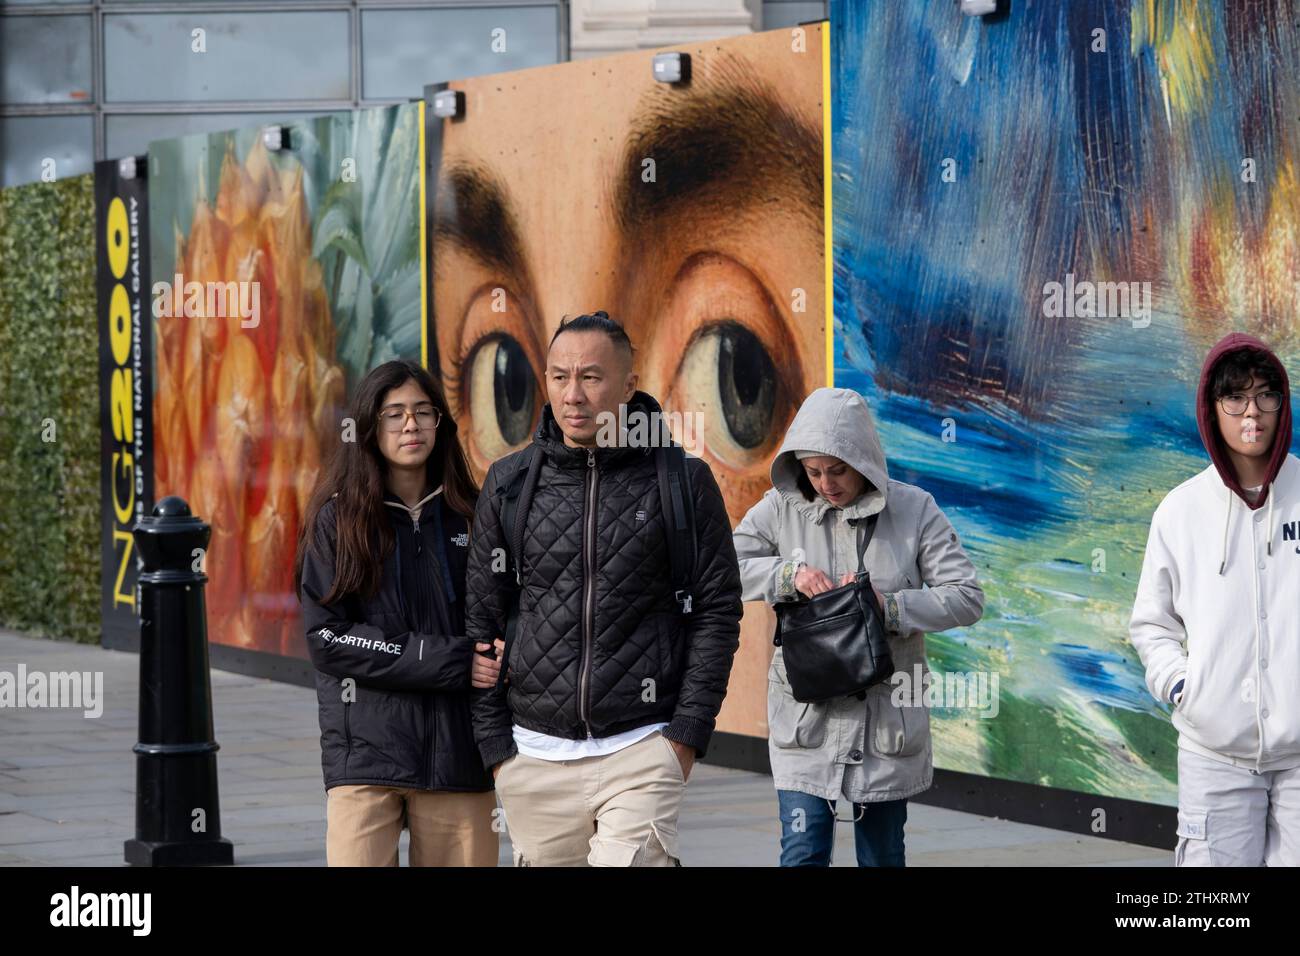 As the National Gallery celebrates its 200th year a hoarding featuring details from many well known paintings by famous artists, including Portrait of a Man by Antonello da Messina as seen here, interact with passers by on 16th October 2023 in London, United Kingdom. Stock Photo